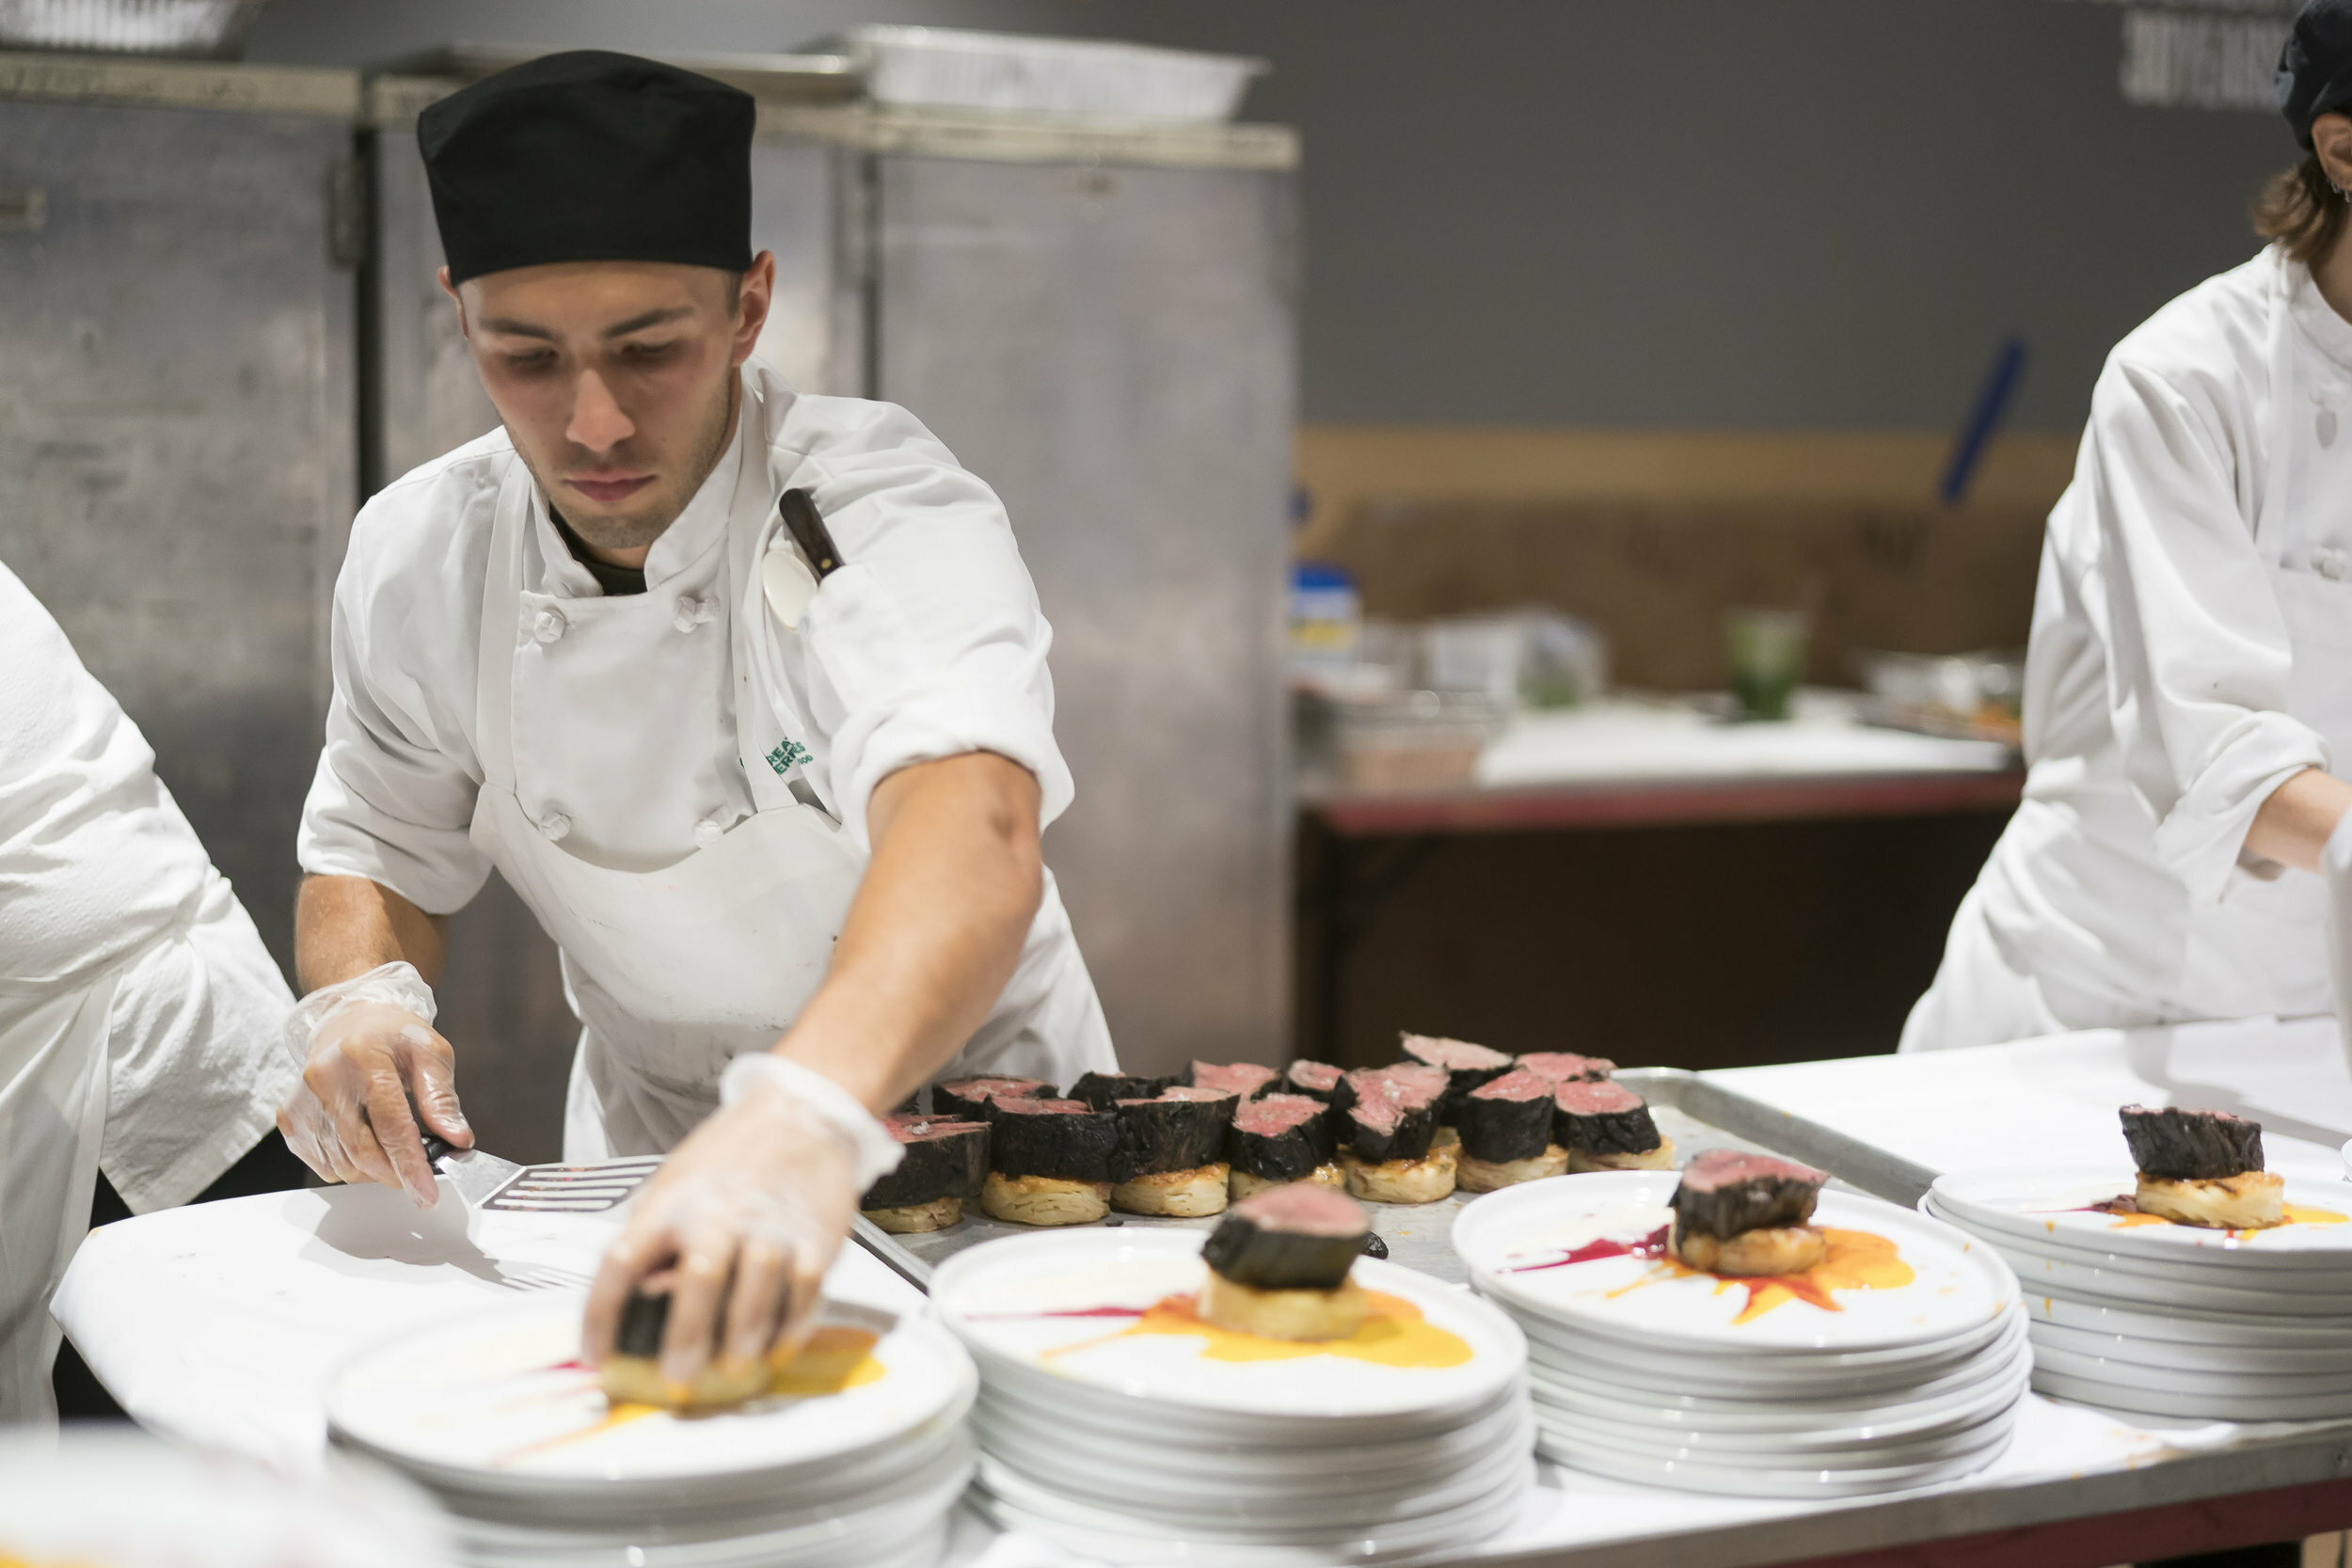 Going Behind the Scenes of the Catering World: This Book Tells All